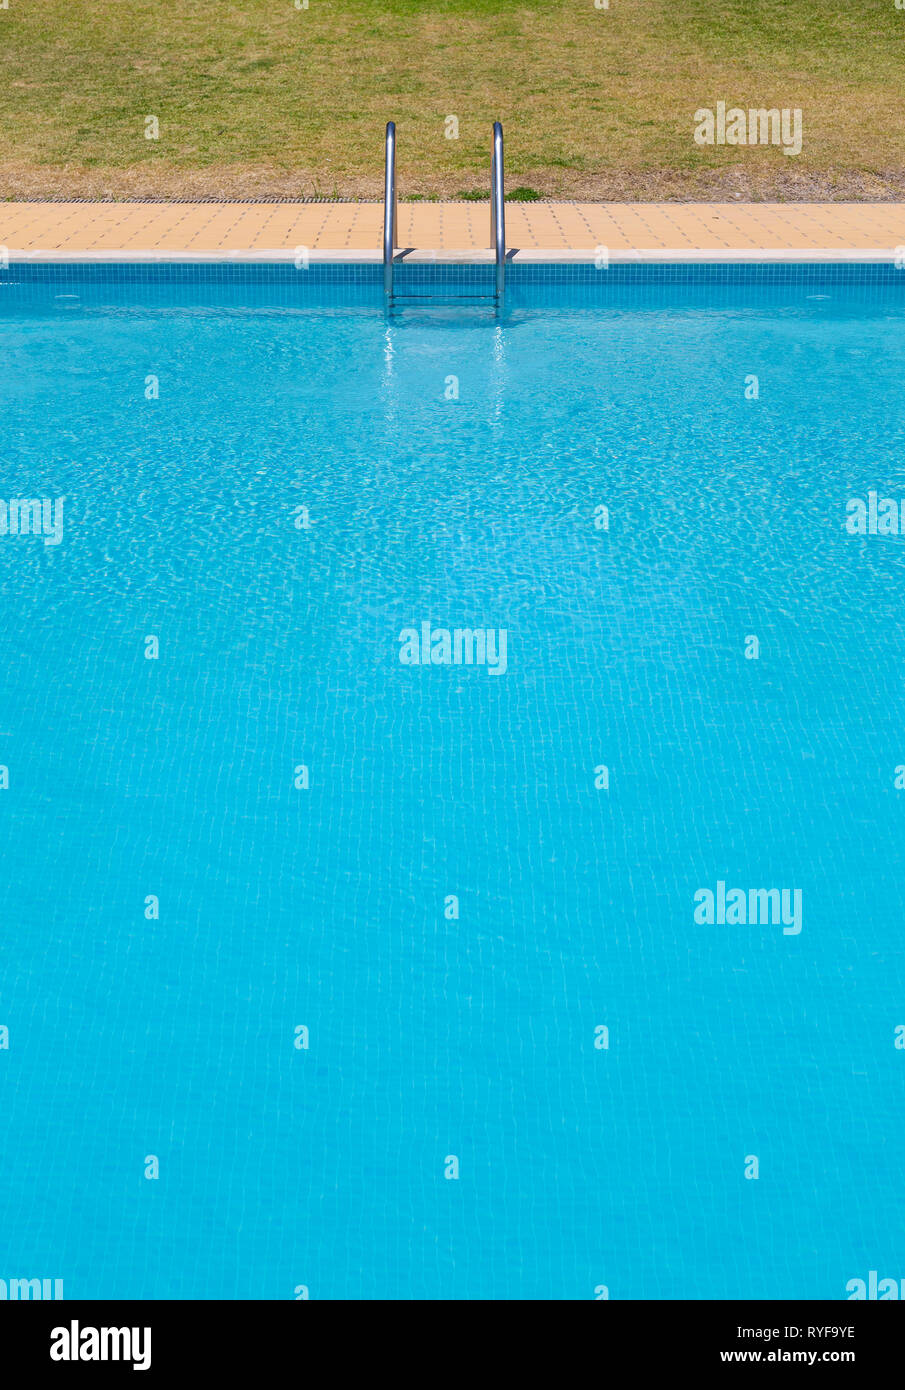 Image of a swimming pool with steps at the end and no people Stock Photo